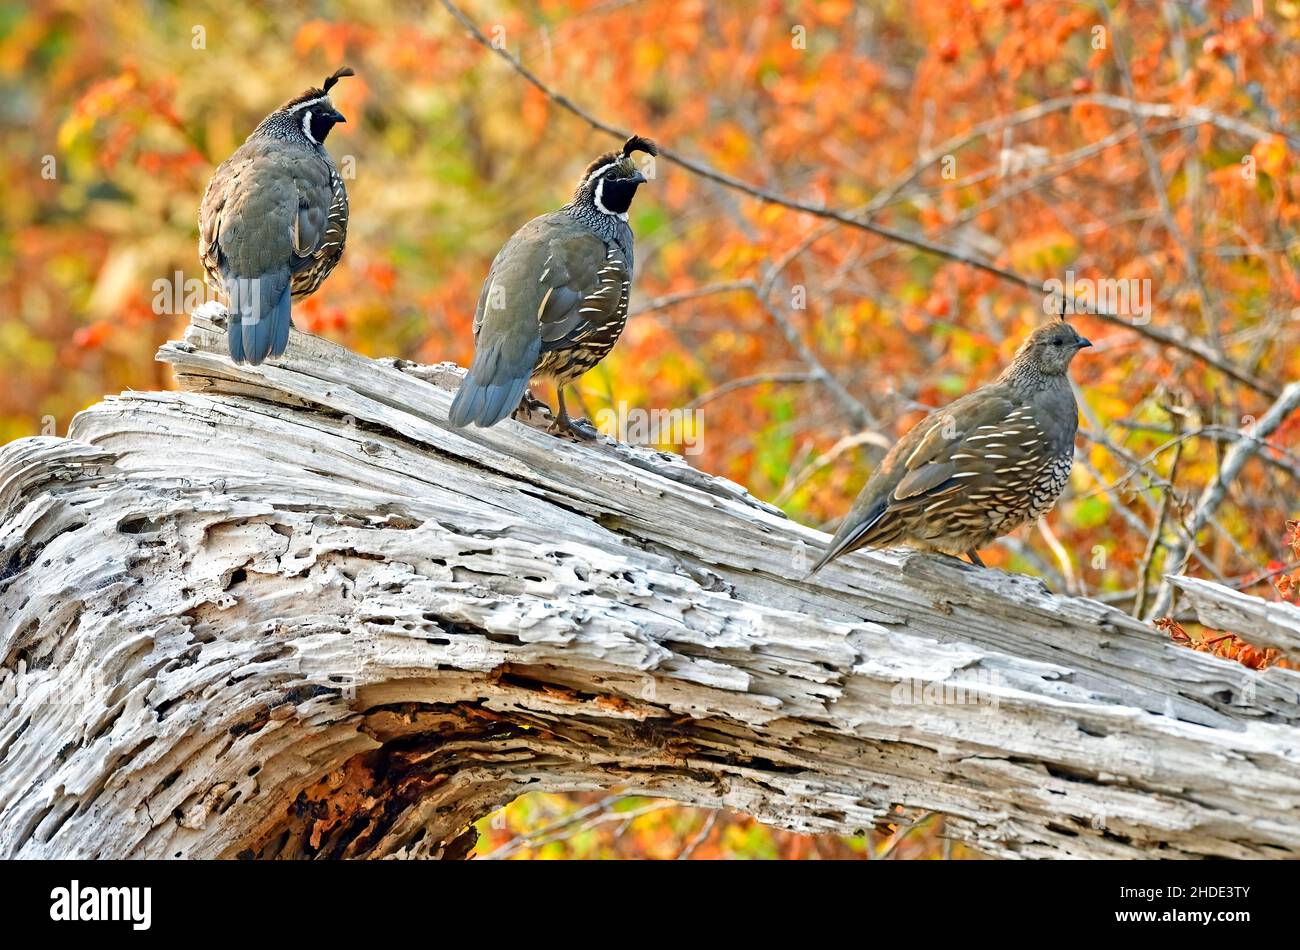 Three California Quail 'Callipepla californica', perched on a piece of driftwood log on the shore of Vancouver Island British Columbia Canada. Stock Photo